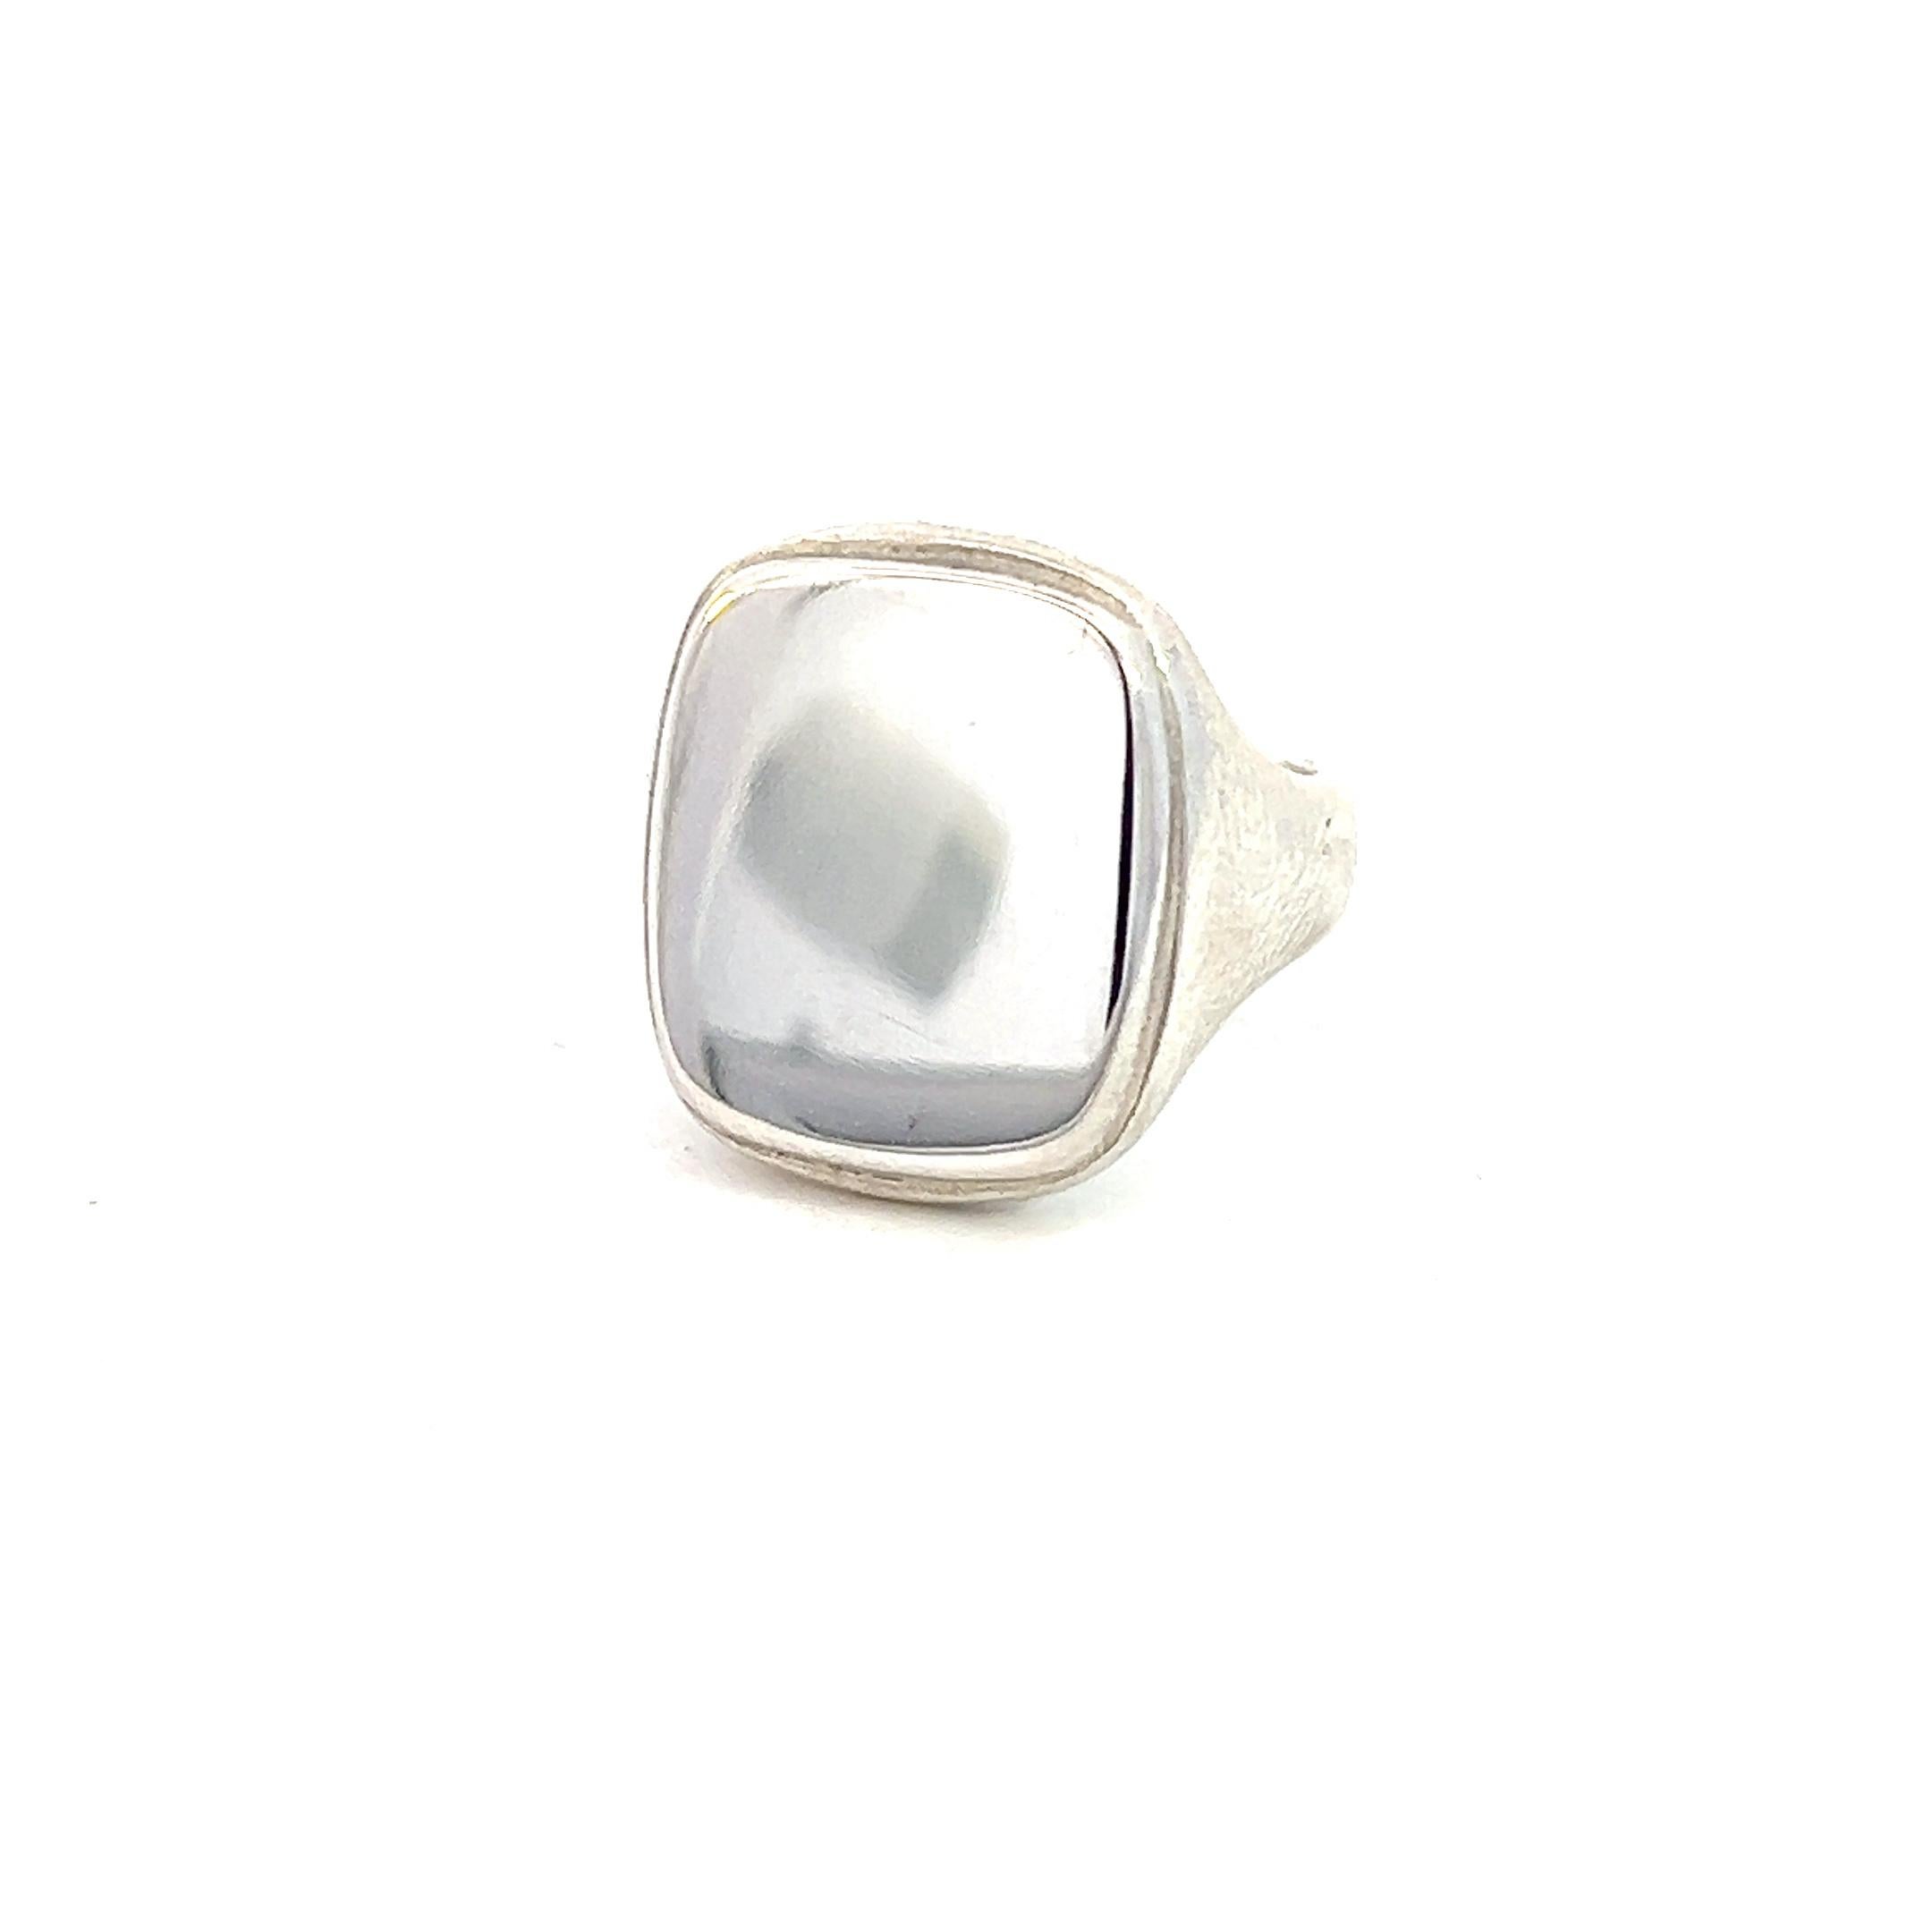 Authentic Tiffany & Co Estate Mens Signet Ring Size 3.75 Silver TIF543

TRUSTED SELLER SINCE 2002

DETAILS
Style: Mens Signet Ring
Ring Size: 3.75
Weight: 10.6 Grams
Metal: Sterling Silver

We try to present our estate items as best as possible and